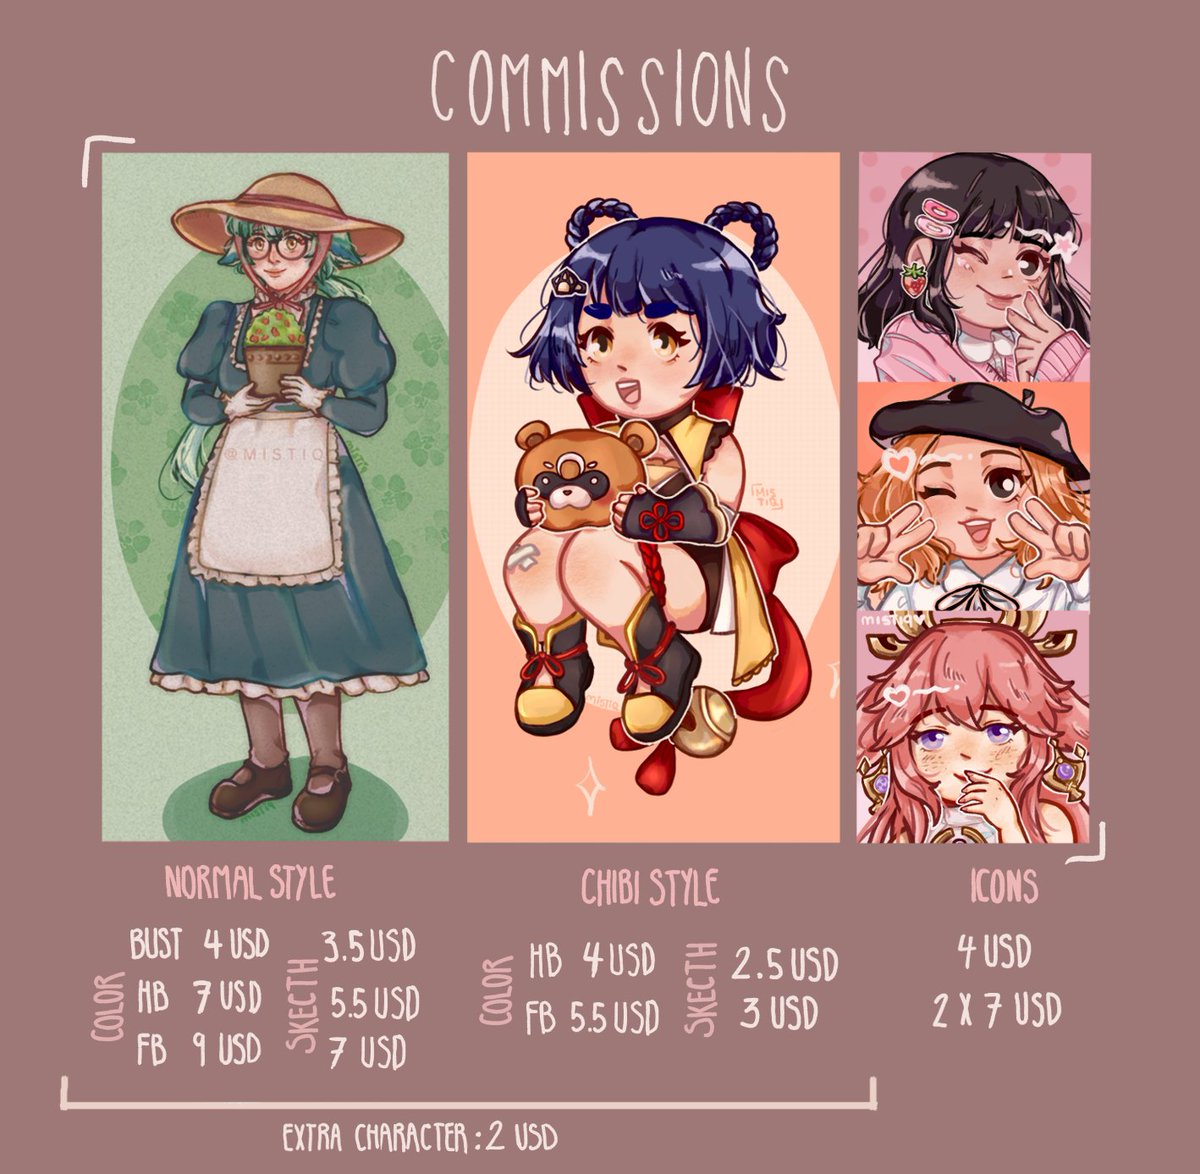 🍂¡COMISSIONS OPEN!🍂

Any doubt or question dm me! Thank you for your support! 🧡
#comissionsopen #comisionesabiertas #chibicomissions